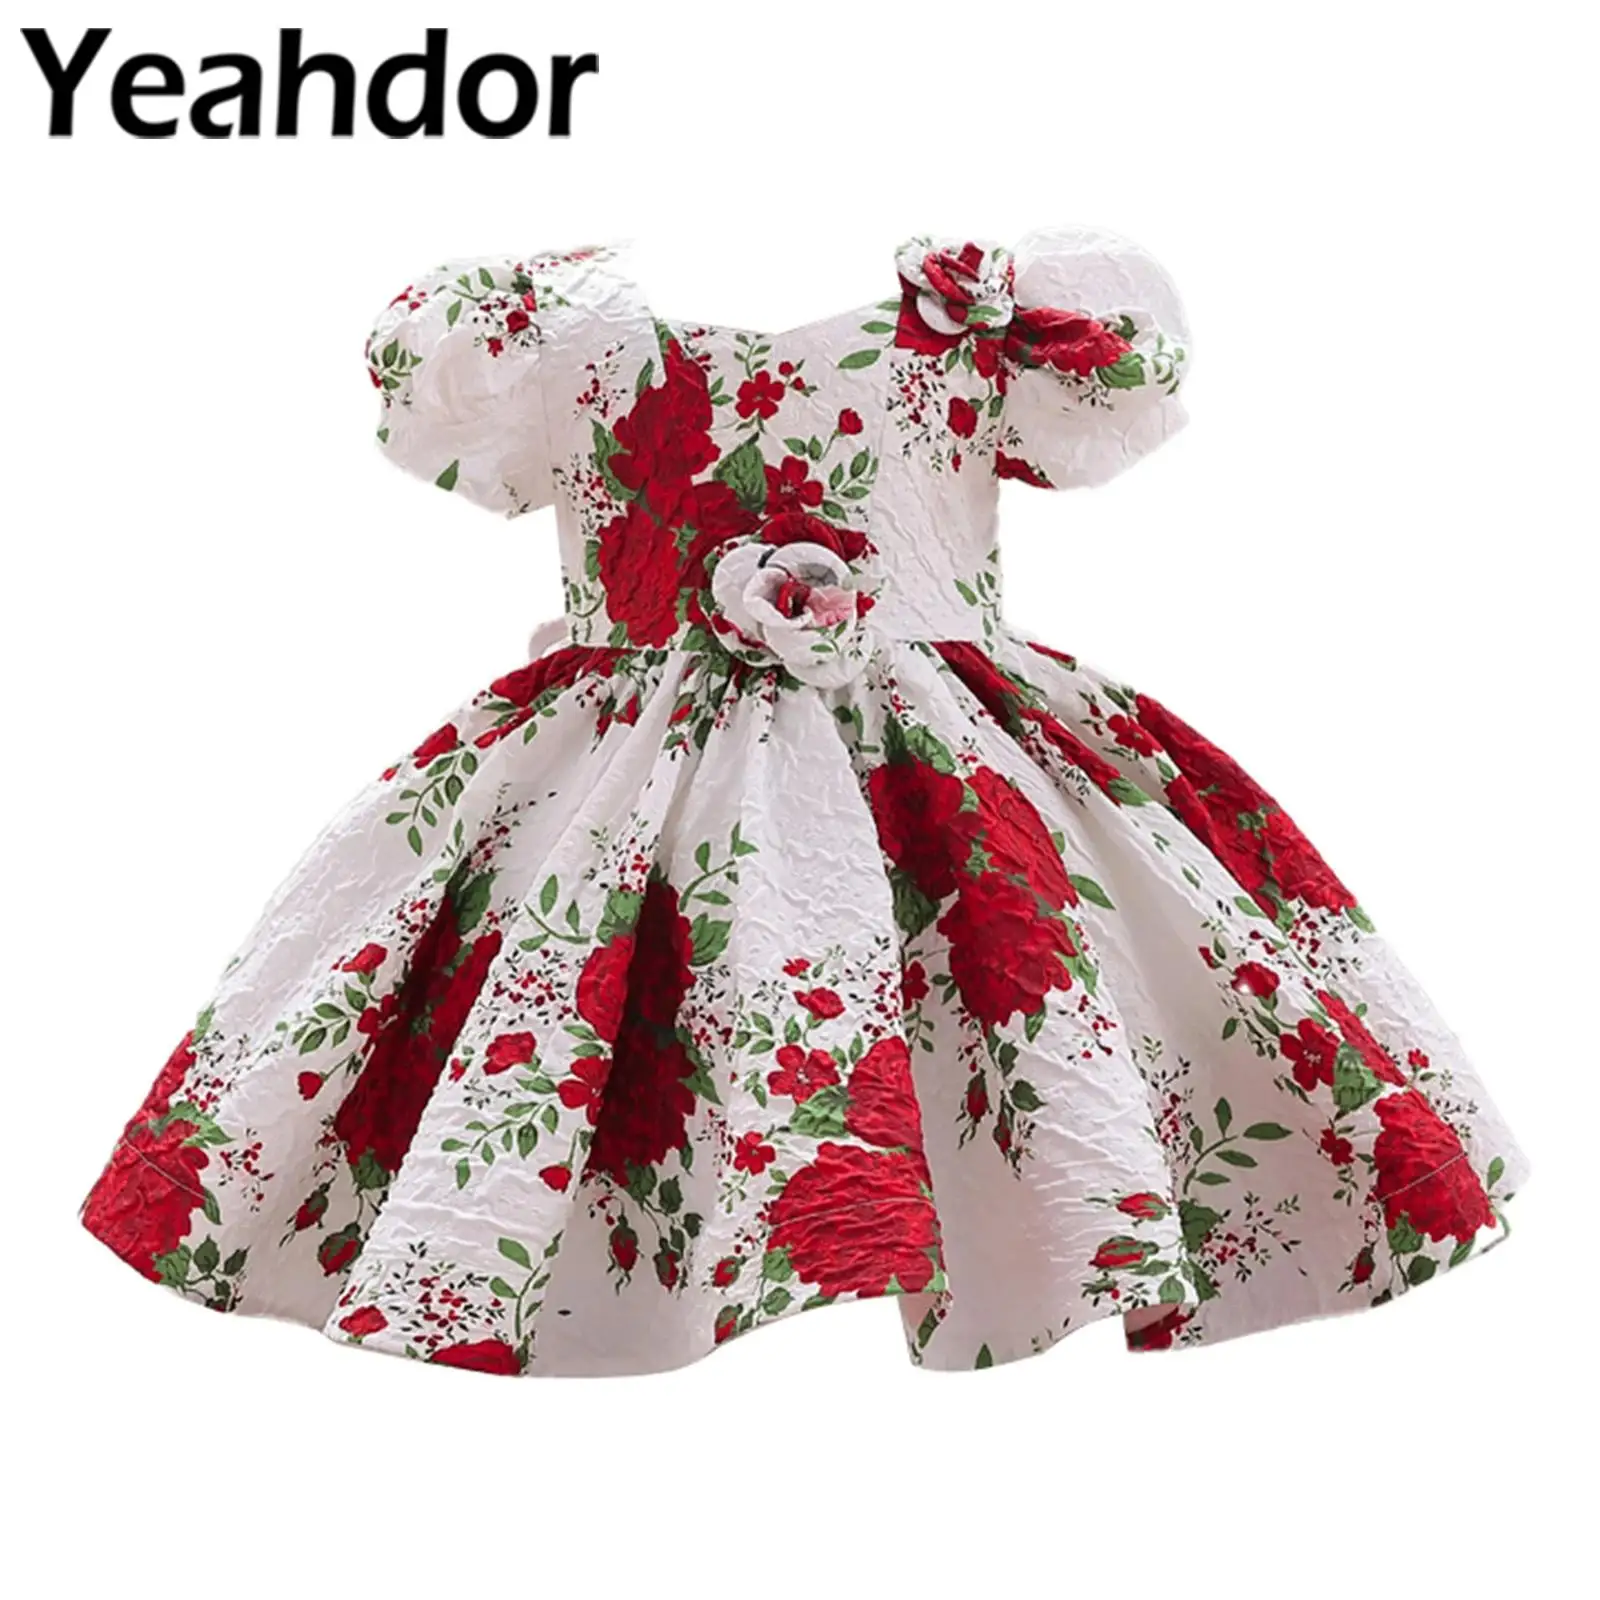 

Girls Flower Princess Dress Ruffled Pleated A-Line Kids Dress Infants Birthday Party Gown for Christening Dresses Baptism Wear